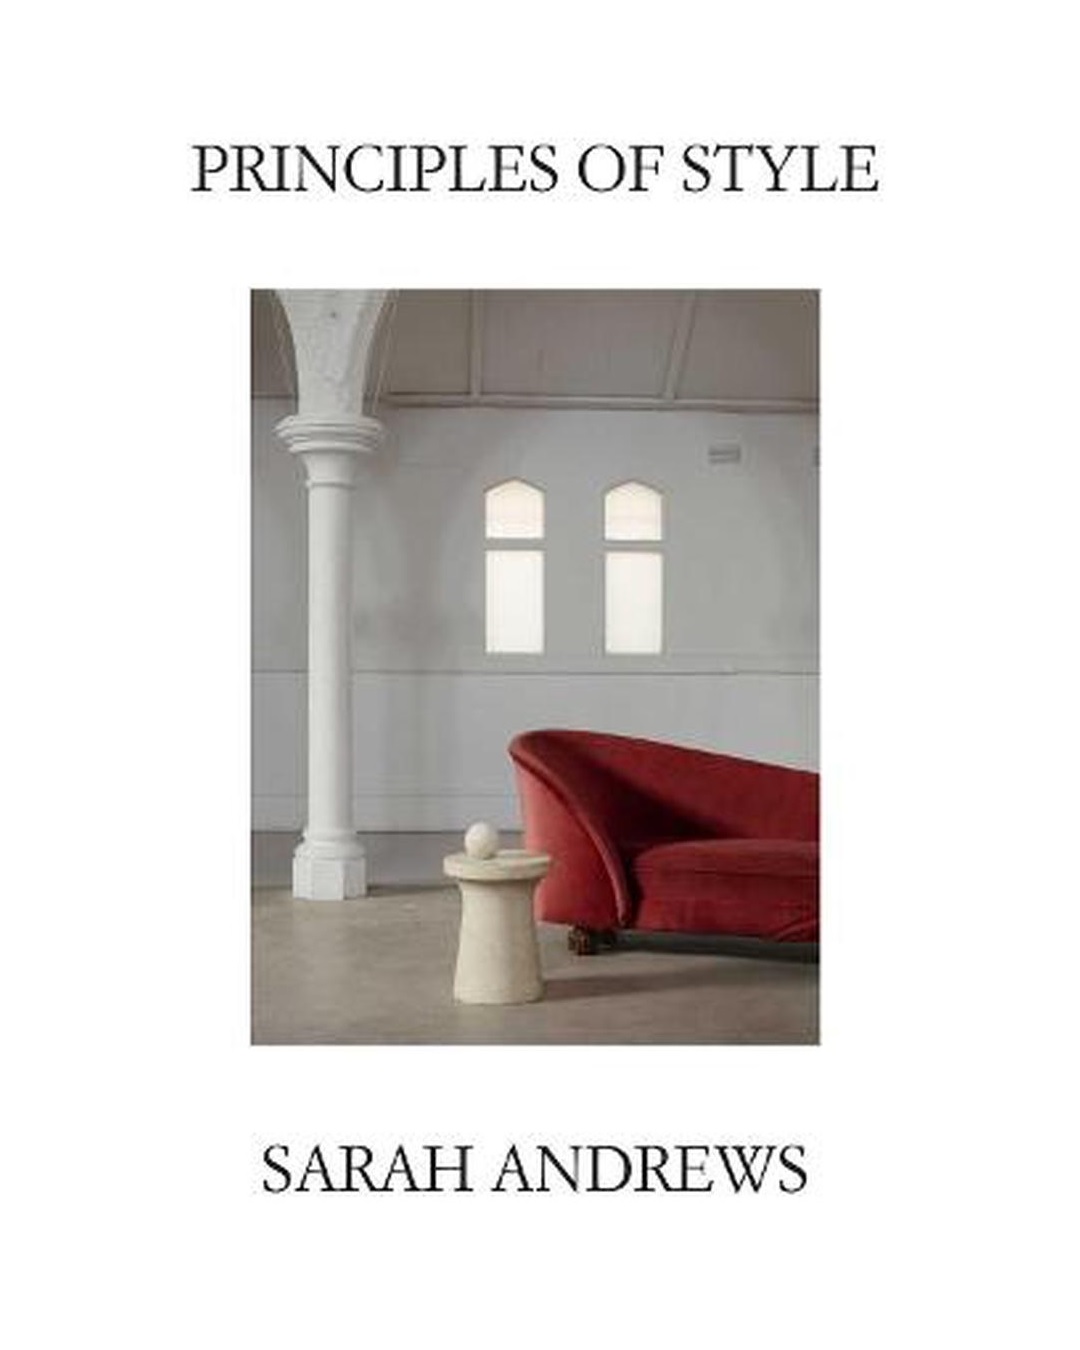 Principles of style book